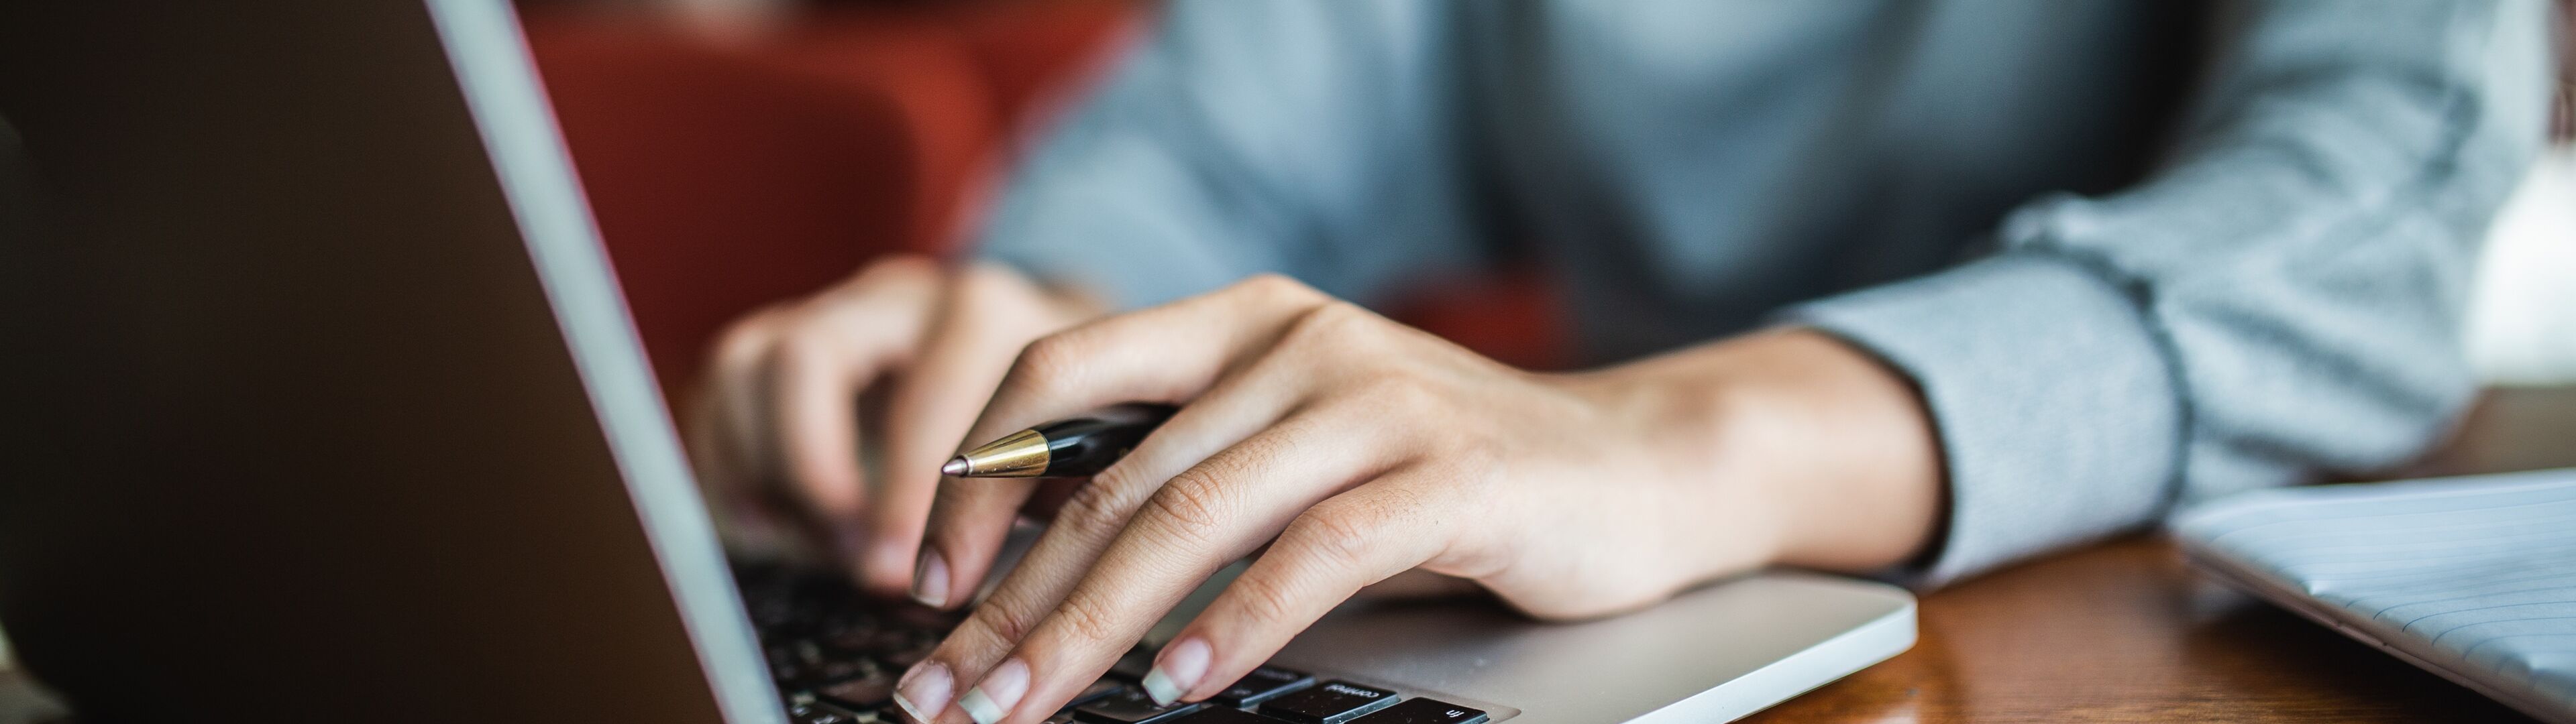 A close-up of a person's hands typing on a laptop keyboard, suggesting a professional setting.